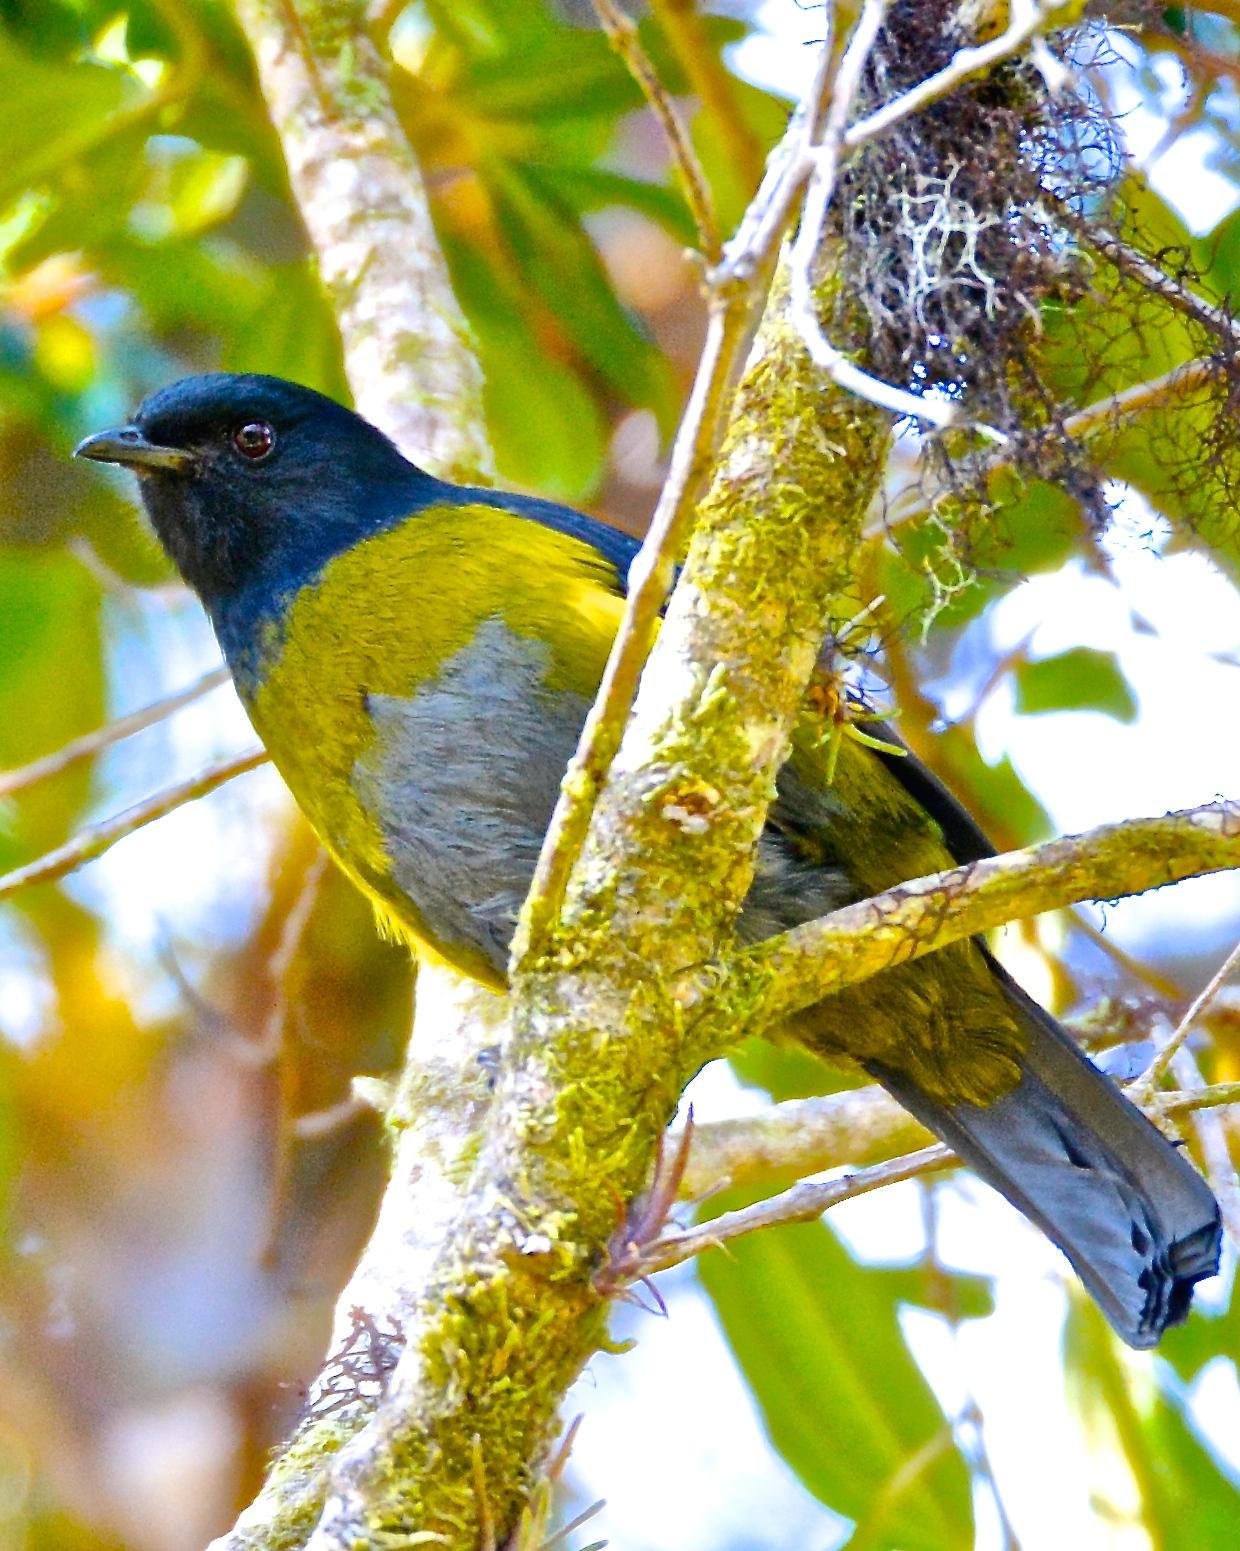 Black-and-yellow Silky-flycatcher Photo by Gerald Friesen